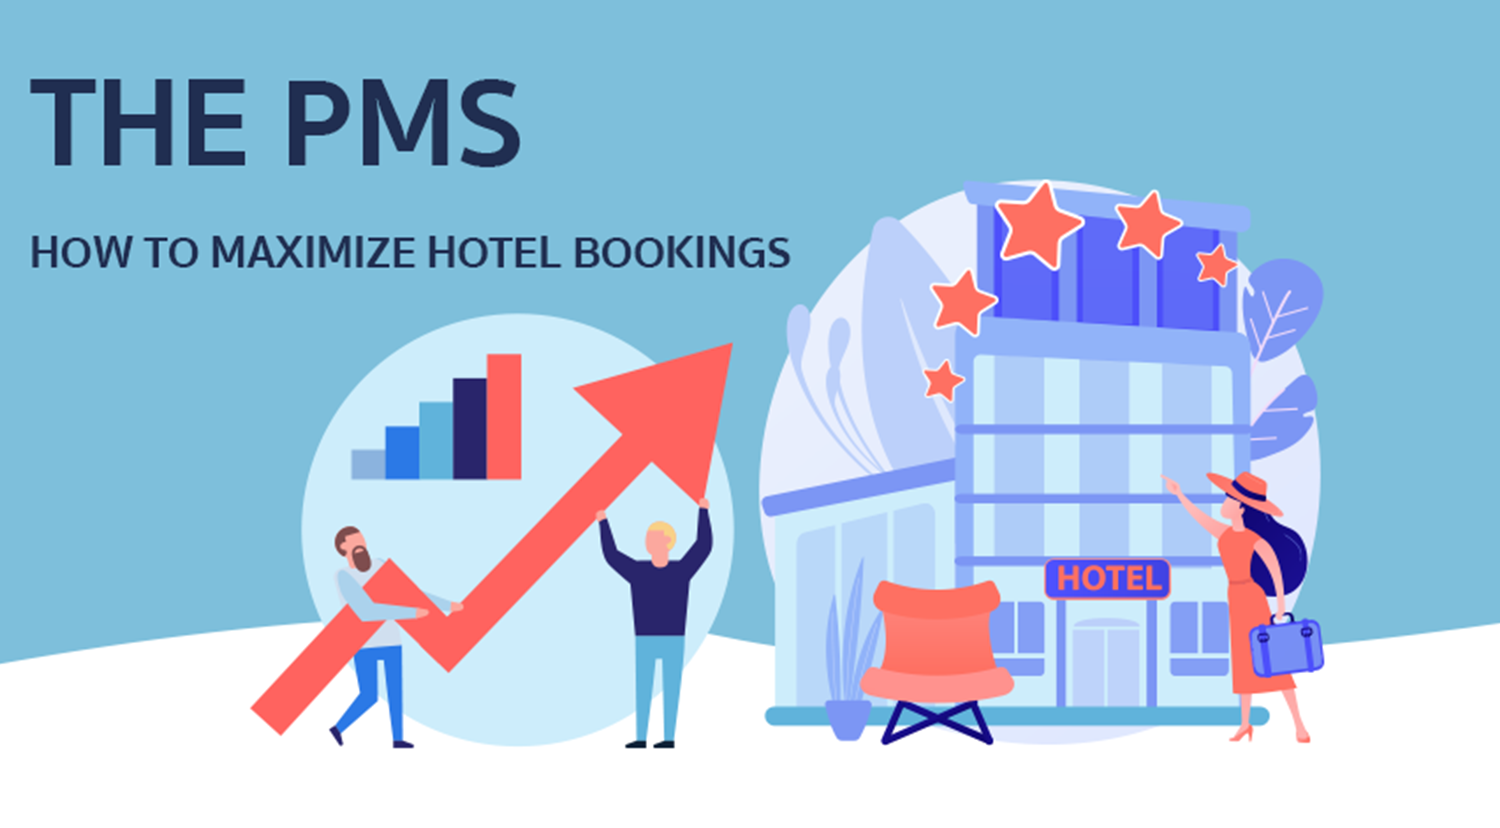 The PMS - How to maximize hotel bookings